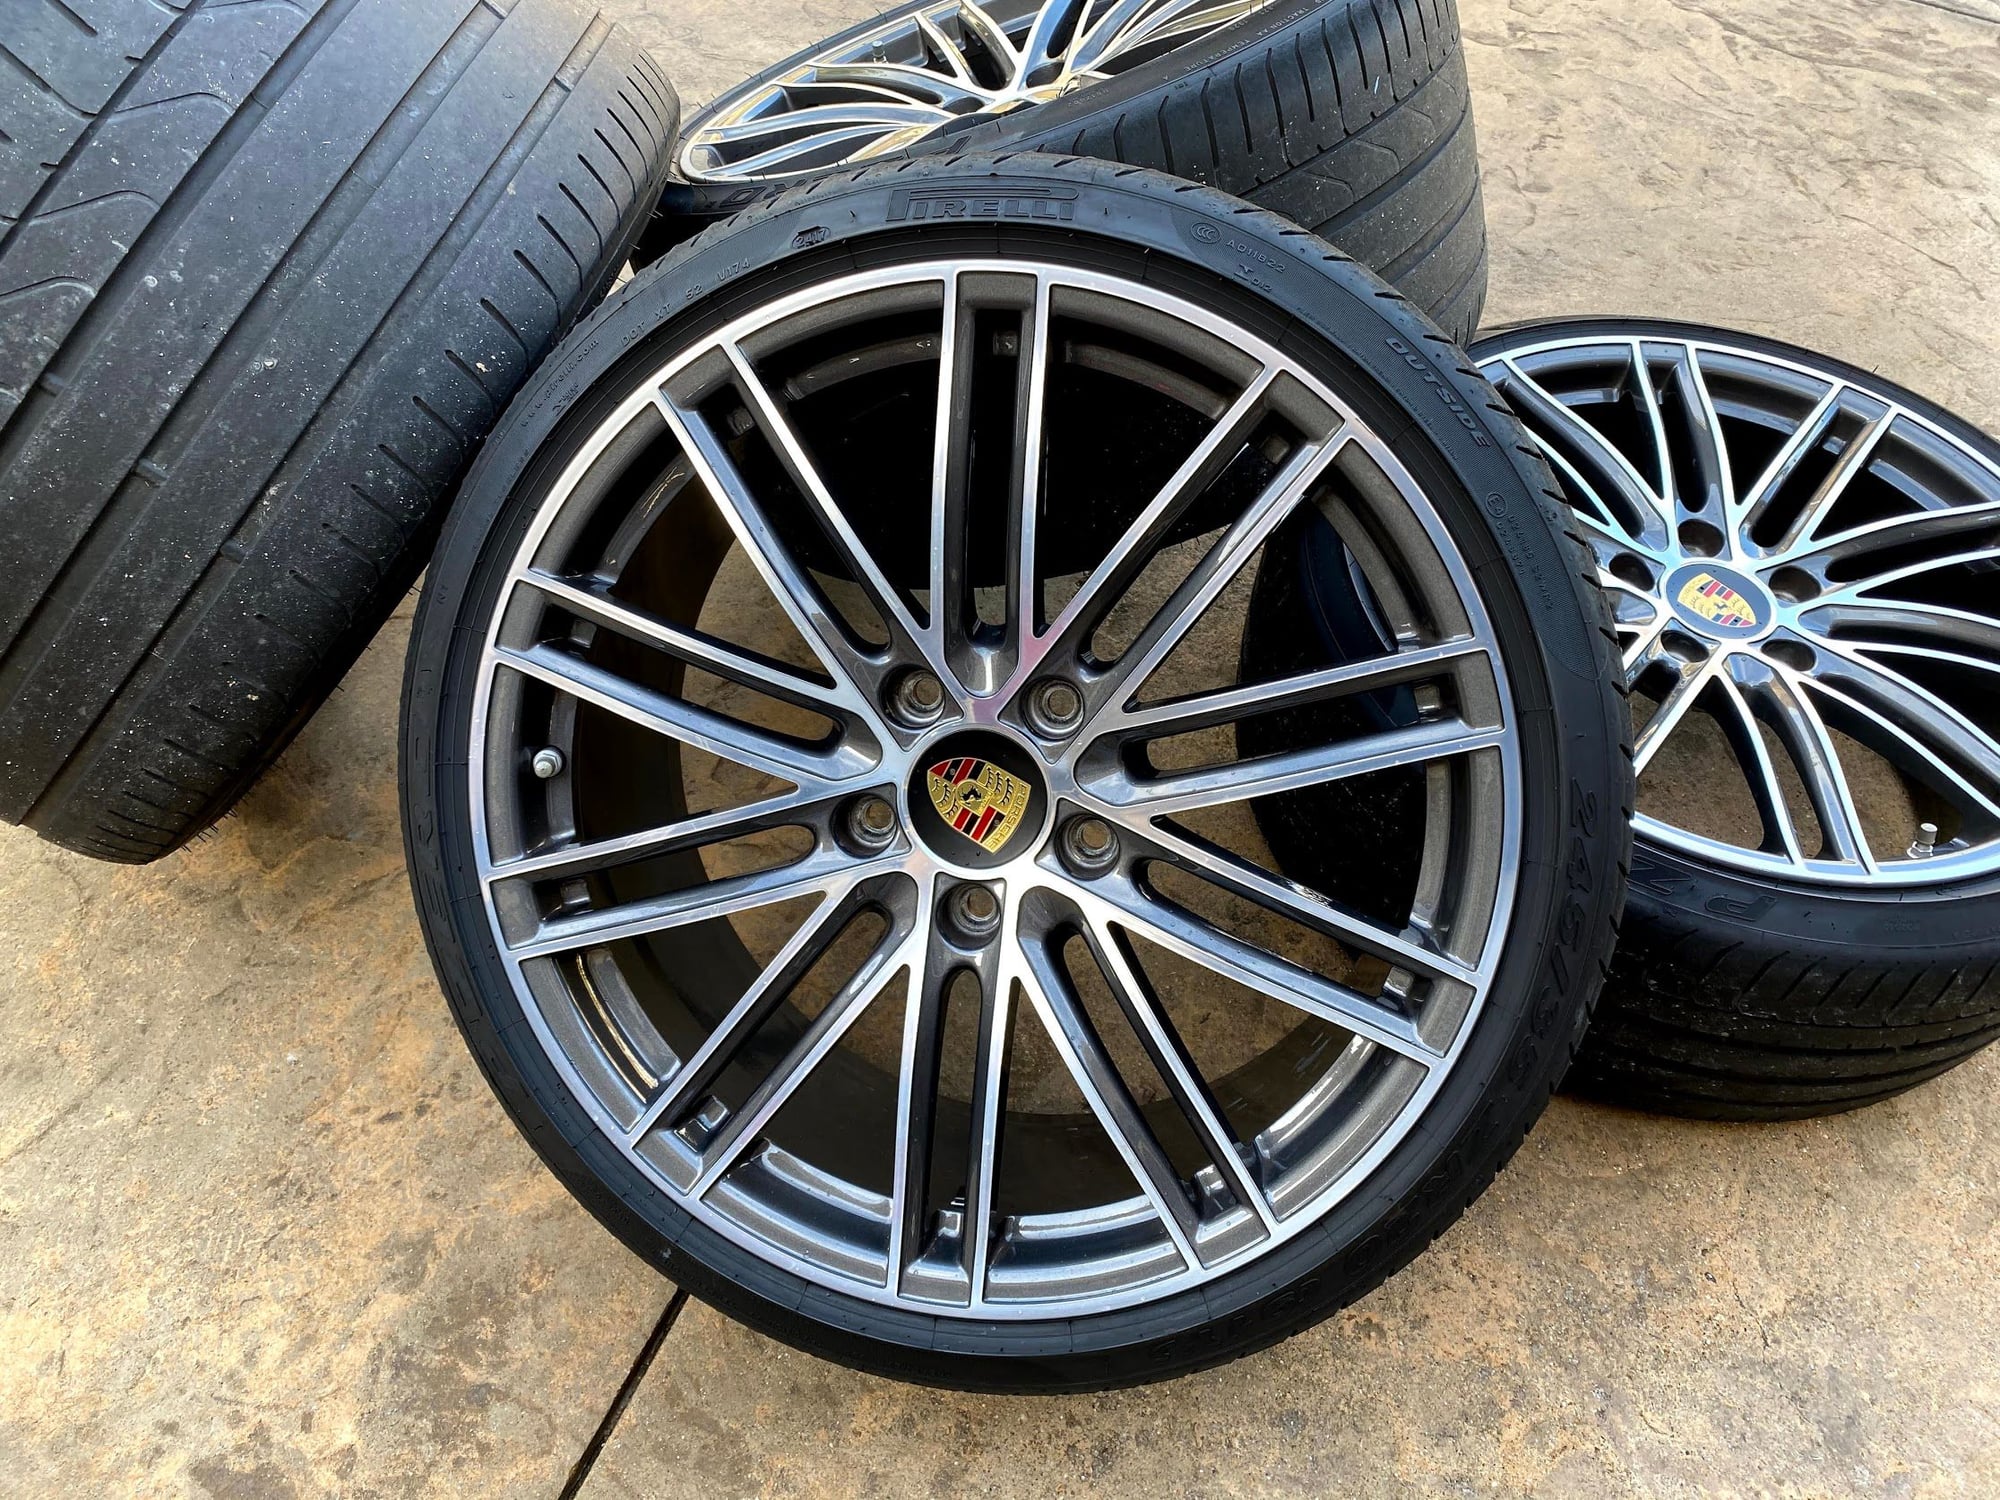 Wheels and Tires/Axles - Porsche OEM 20-inch "Turbo IV" FORGED aluminum-alloy wheels - Used - 2012 to 2019 Porsche 911 - Thousand Oaks, CA 91360, United States